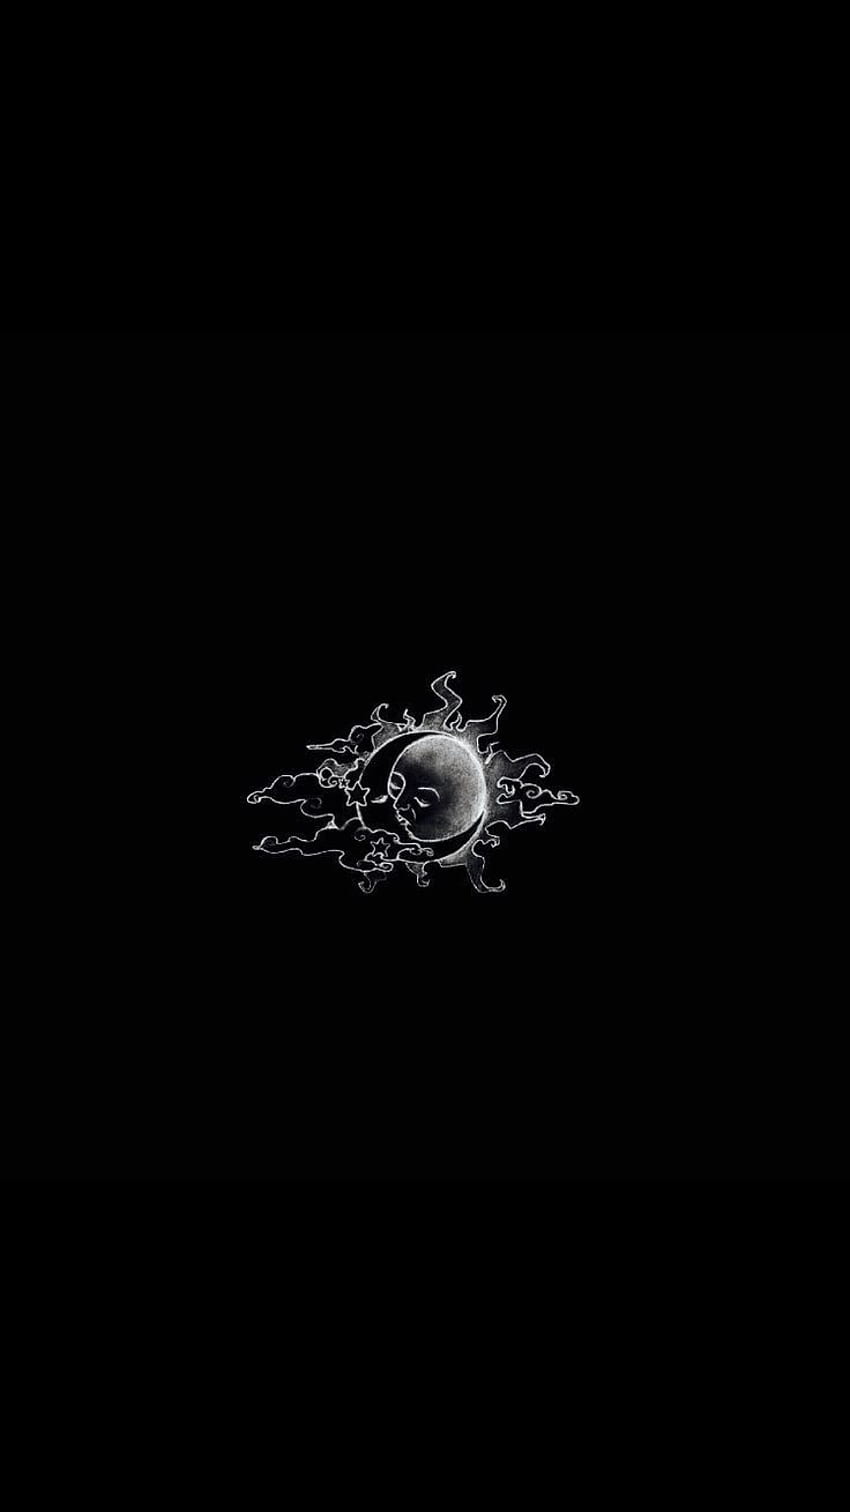 Black background wallpaper with a white moon and lightning - Sun, sunlight